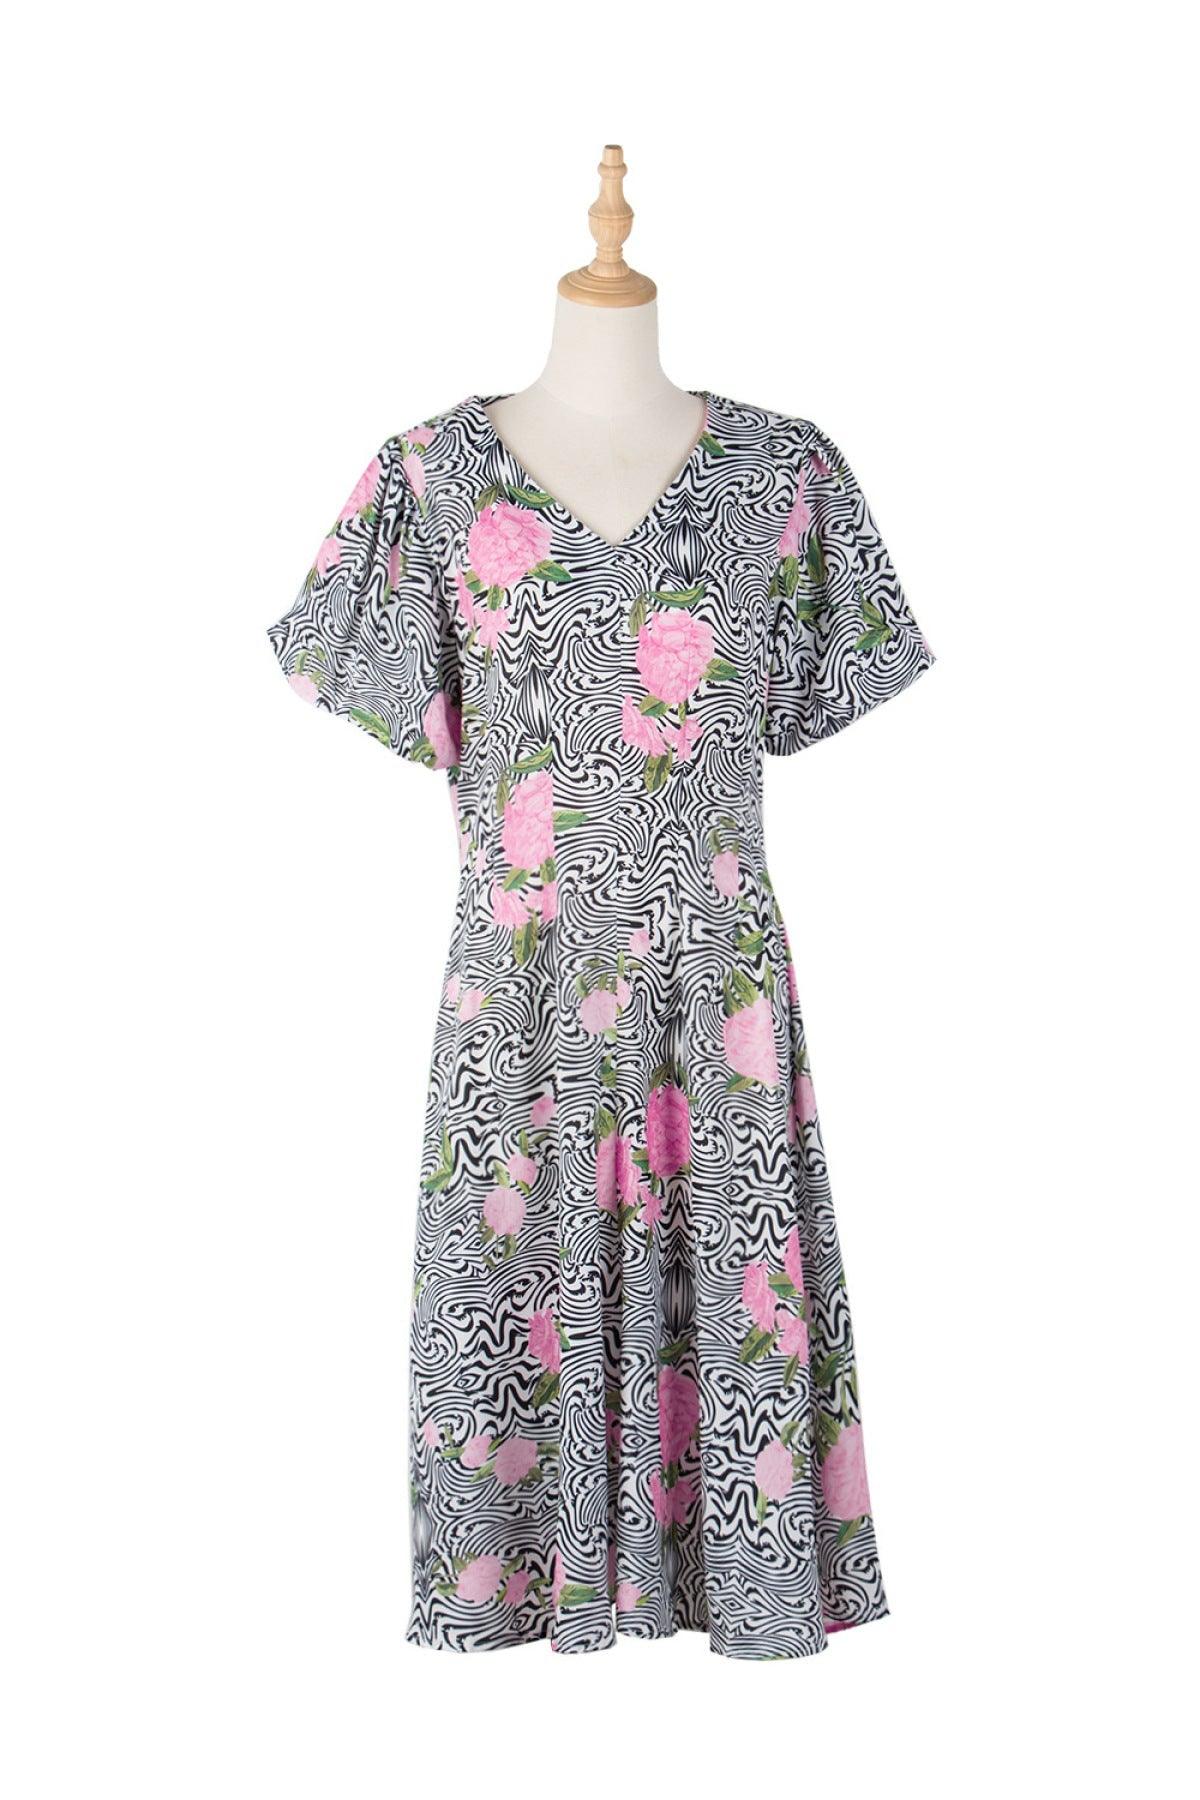 Floral & Abstract Print Puff Sleeve Dress - Shop Now!